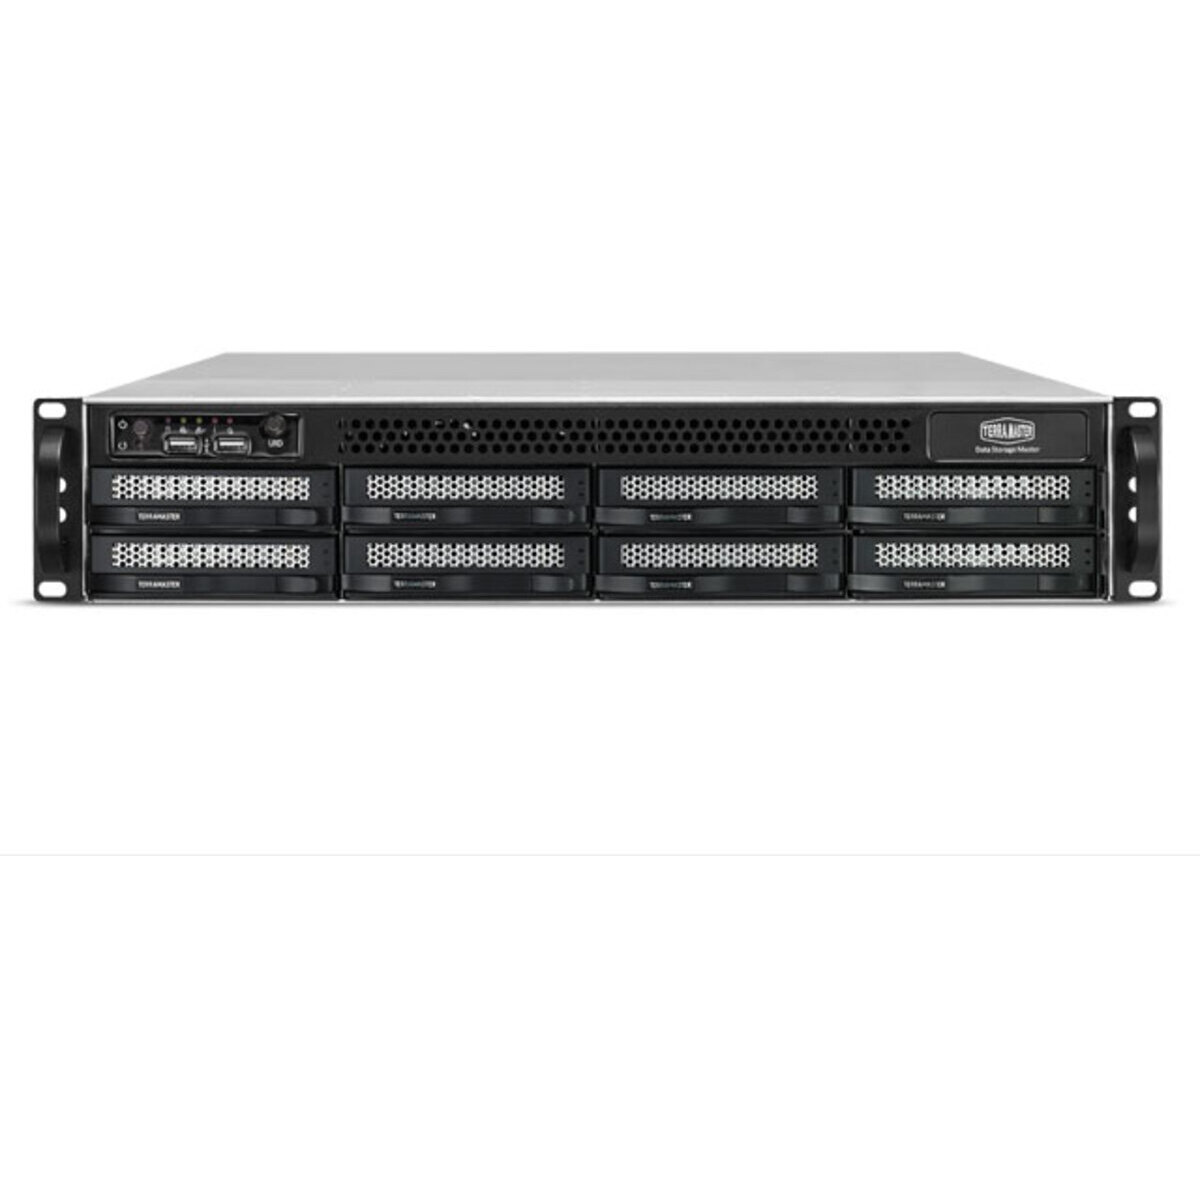 TerraMaster U8-522-9400 120tb 8-Bay RackMount Large Business / Enterprise NAS - Network Attached Storage Device 5x24tb Seagate IronWolf Pro ST24000NT002 3.5 7200rpm SATA 6Gb/s HDD NAS Class Drives Installed - Burn-In Tested U8-522-9400